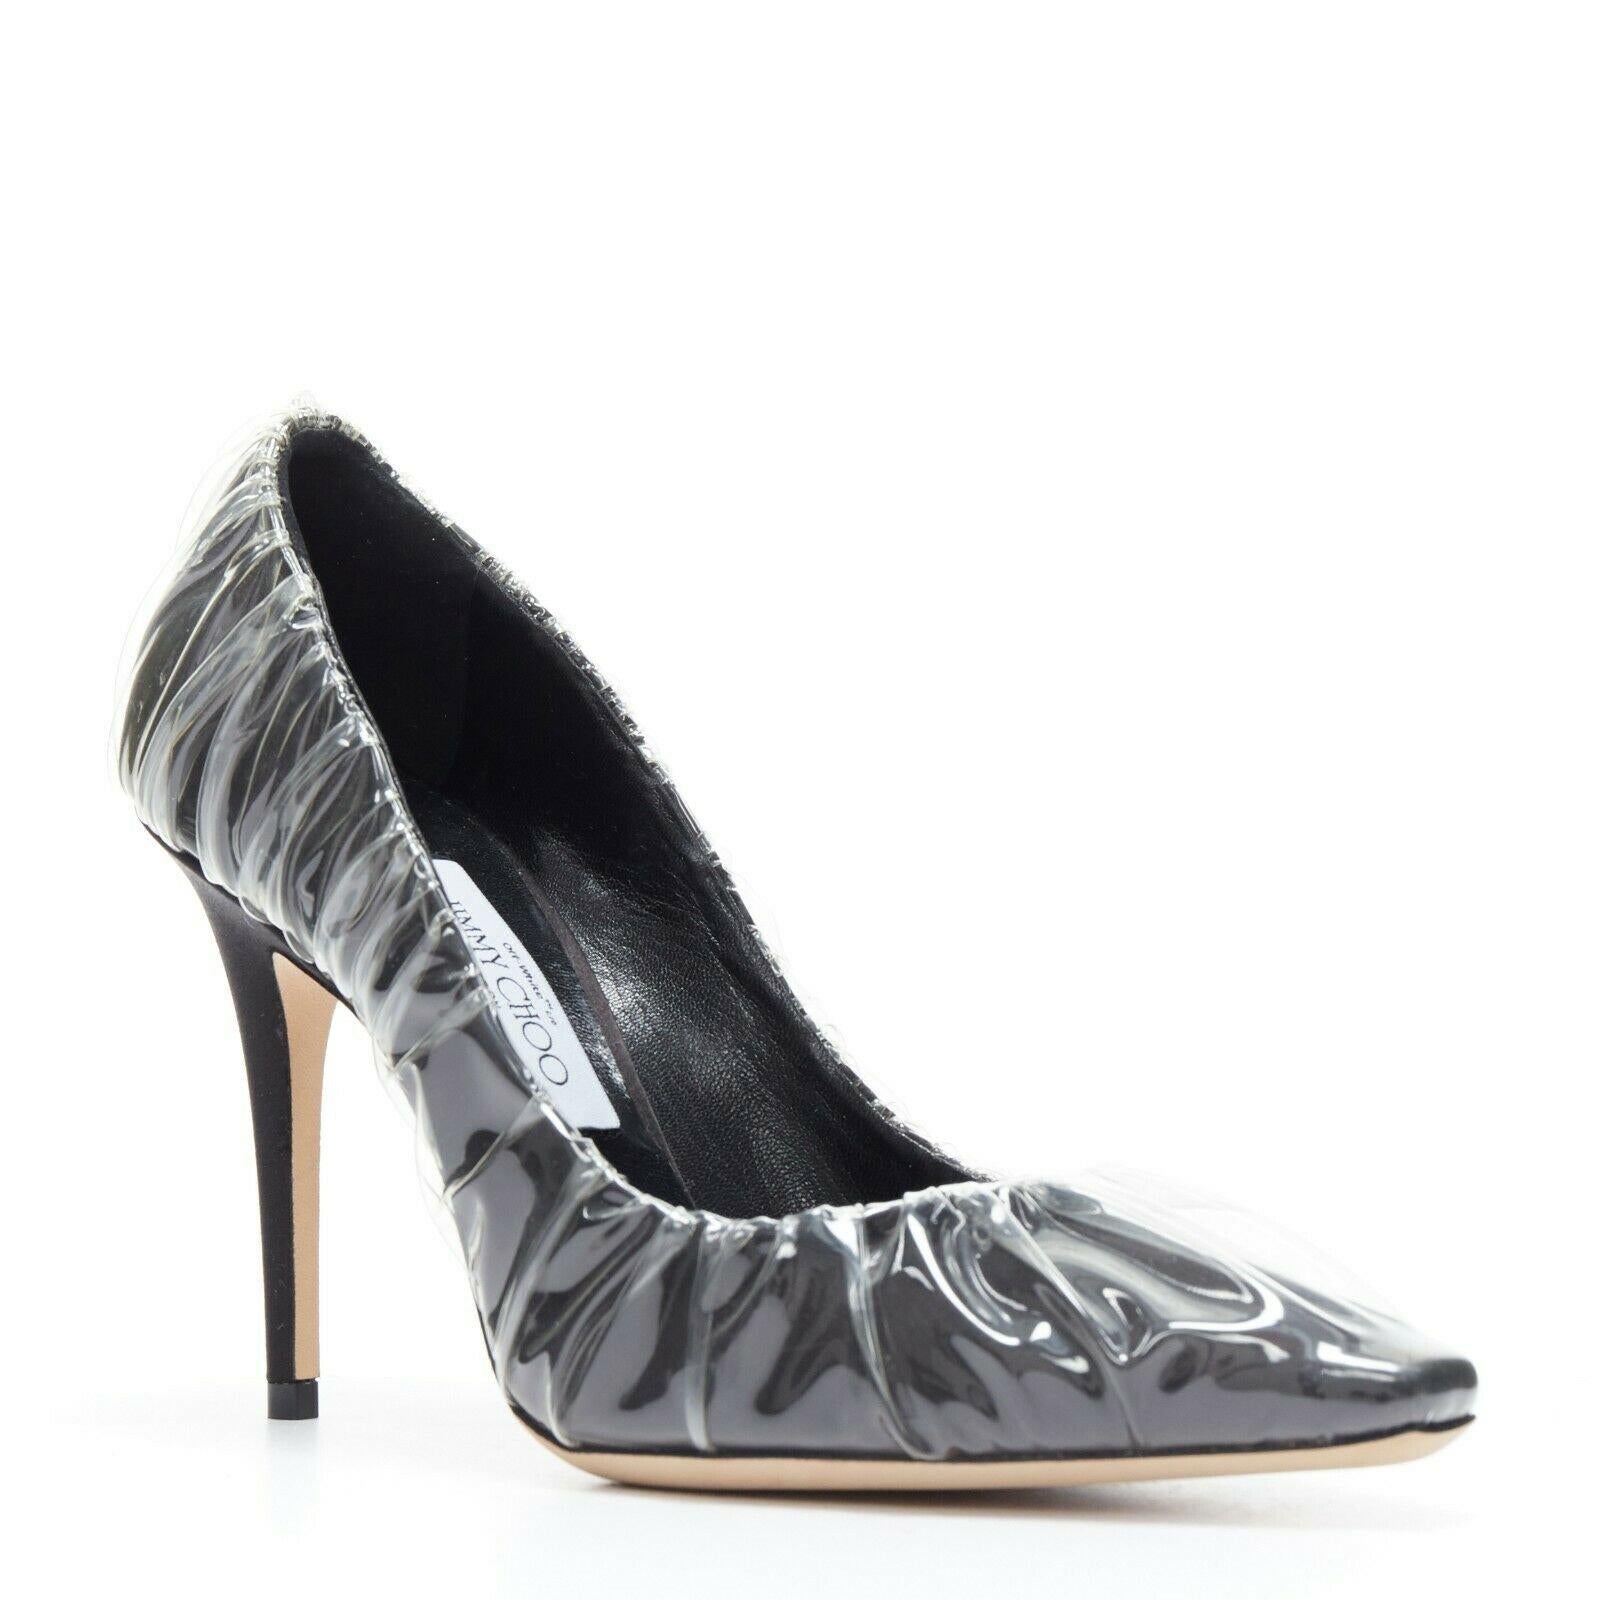 OFF-WHITE JIMMY CHOO black satin point transparent ruche high heel shoes EU38 
Reference: LNKO/A01122 
Brand: Jimmy Choo 
Designer: Jimmy Choo 
Material: satin 
Color: Black 
Extra Detail: Scarpin style. Pointed toe. Slim heels. Wrapped in